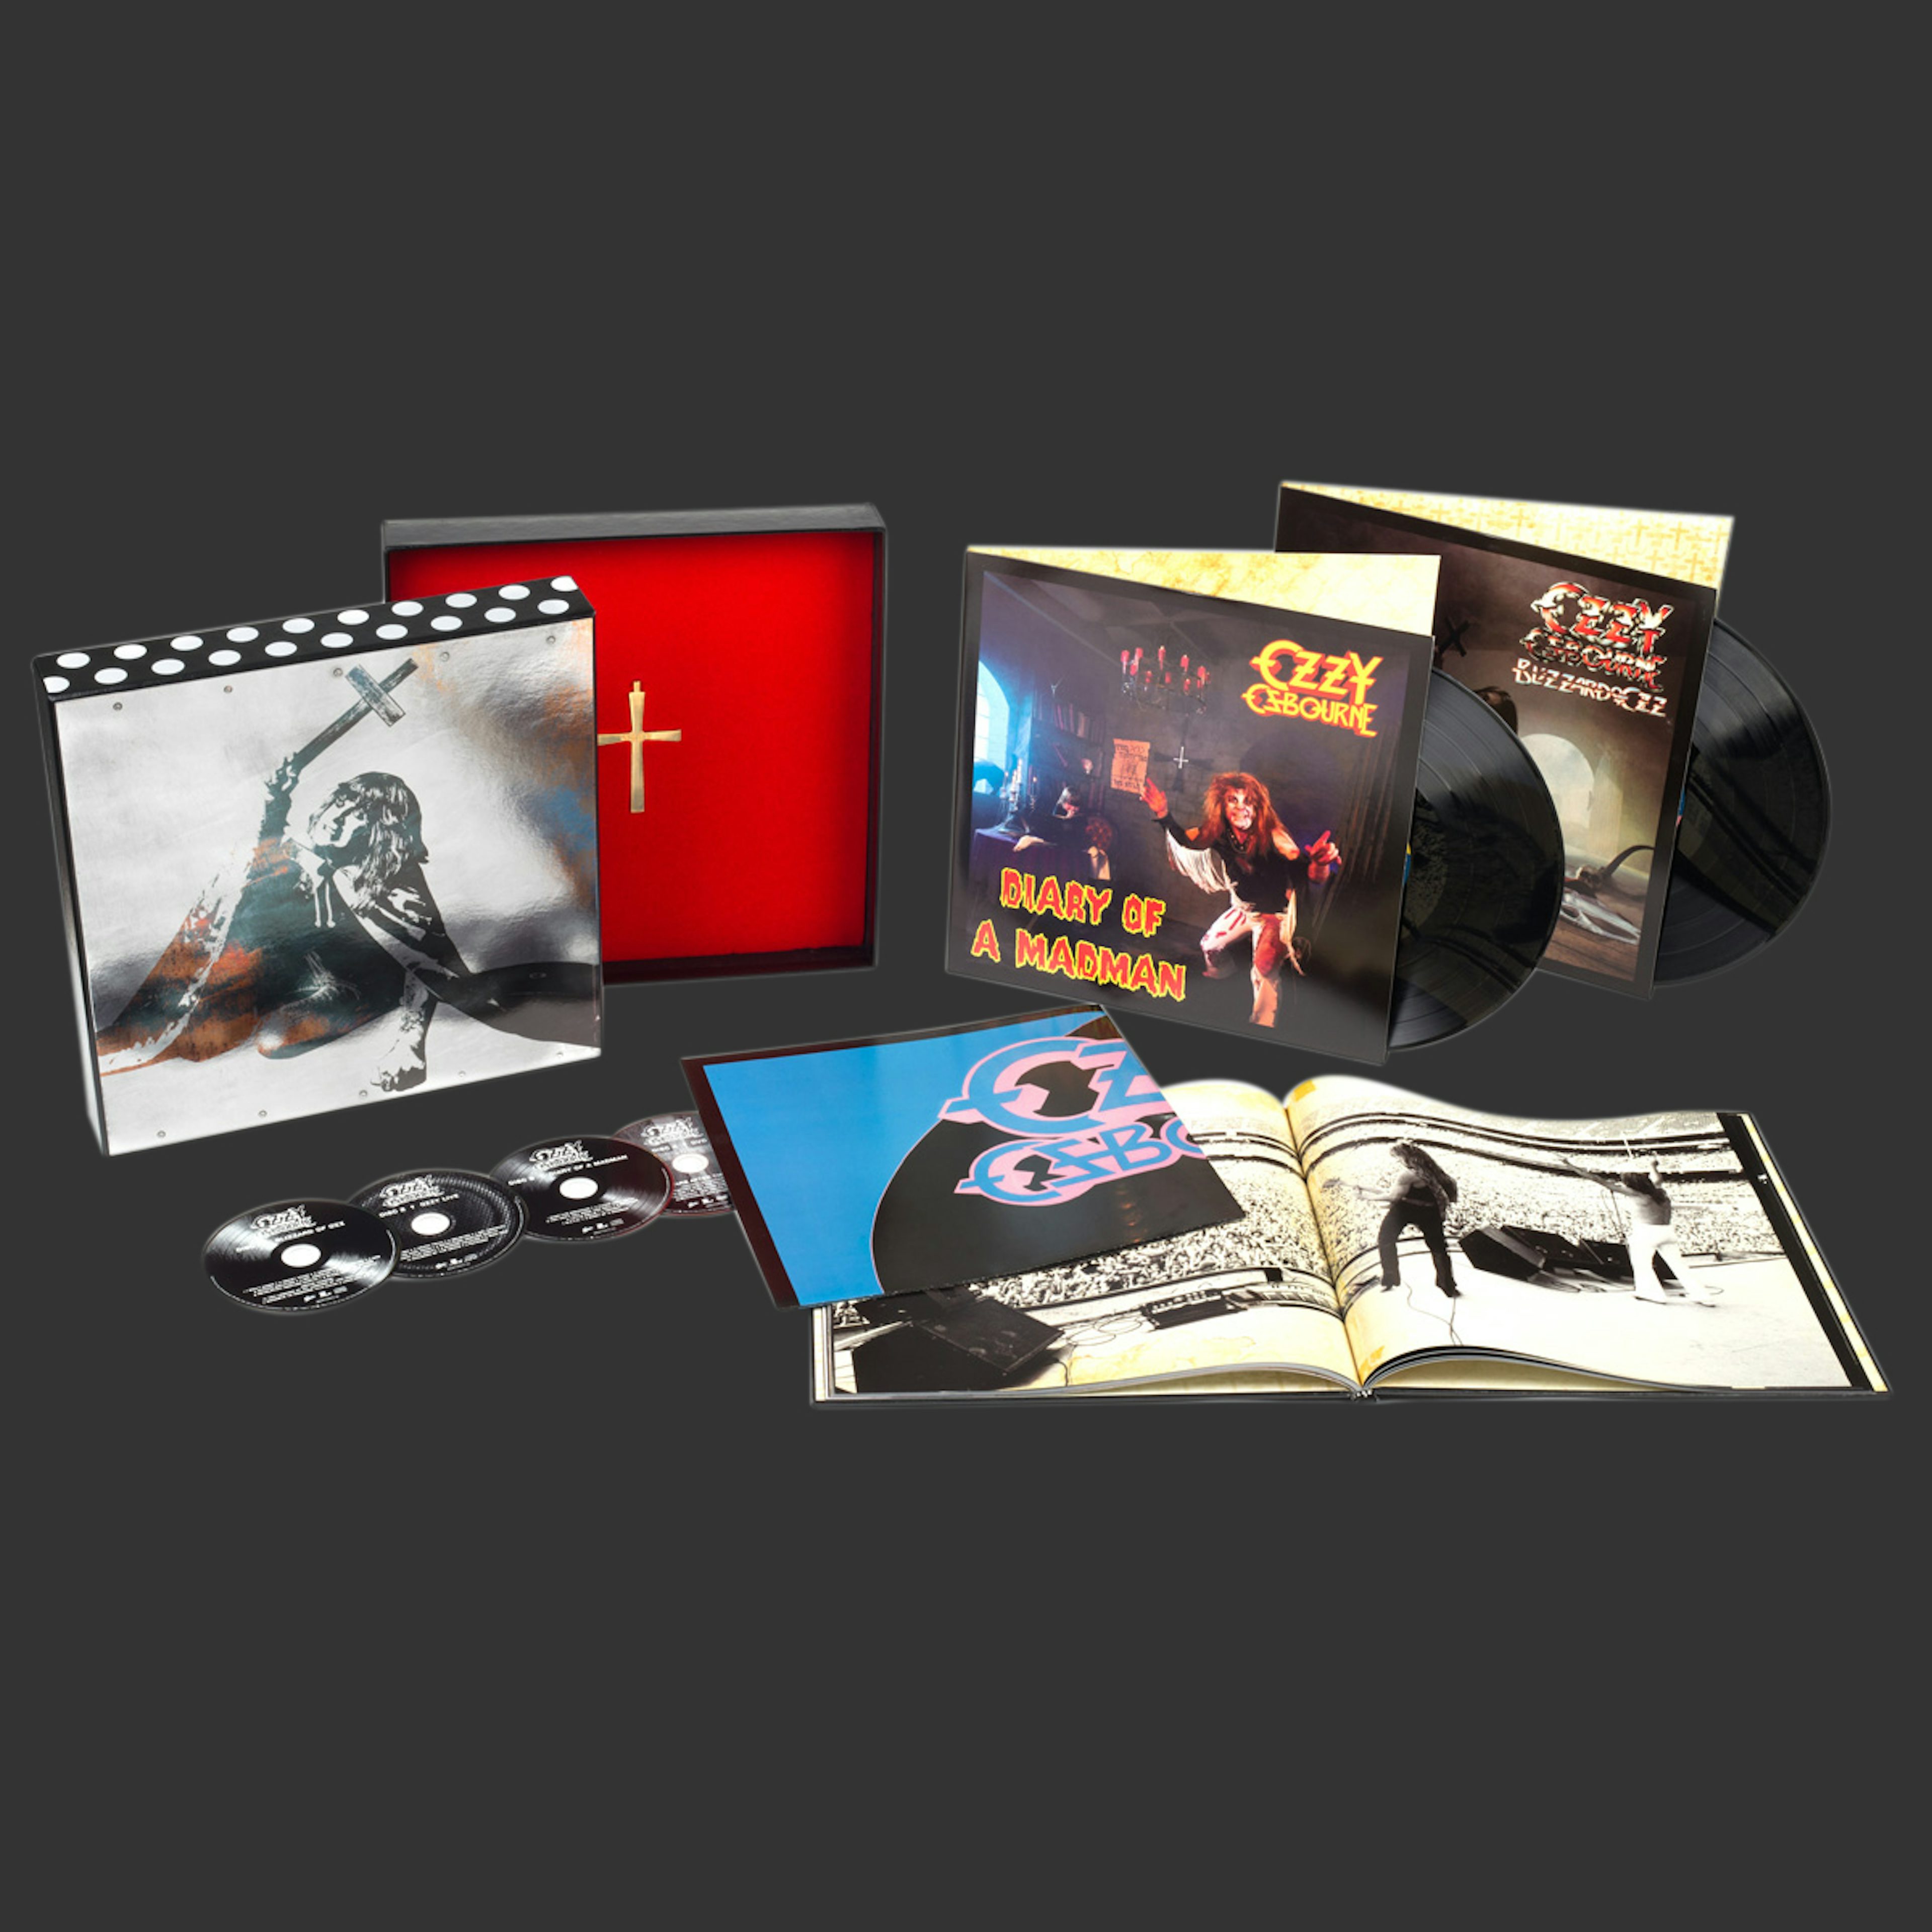 Diplomati bytte rundt Udholdenhed Ozzy Osbourne Blizzard Of Ozz / Diary Of A Madman - 30th Anniversary CD Box  Set